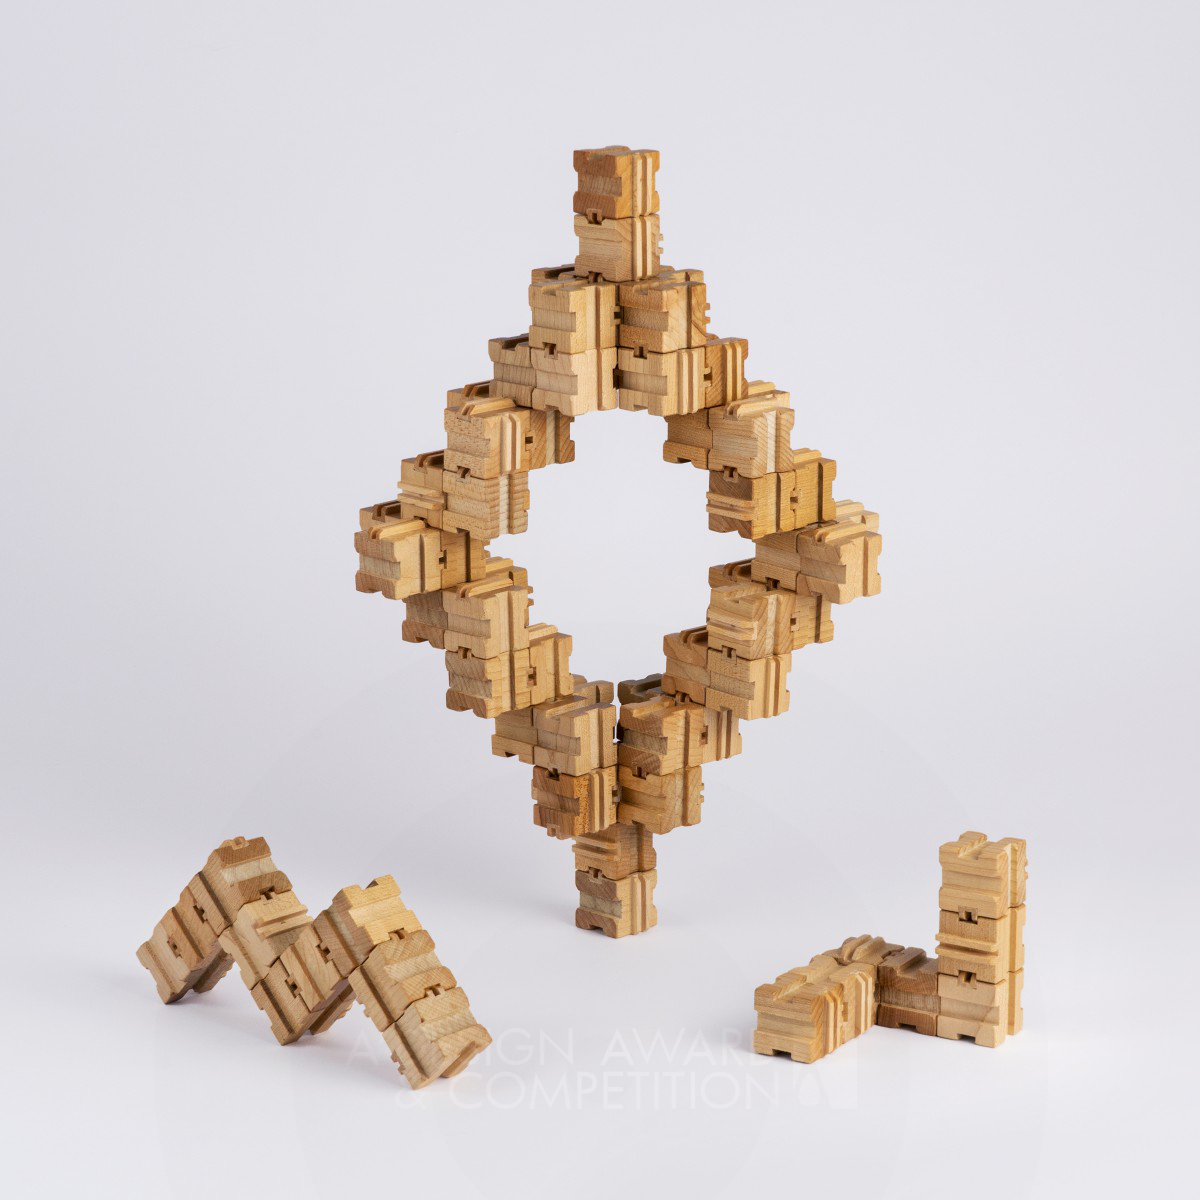 Ying Cui Introduces Morcube, a Versatile and Sustainable Wooden Toy